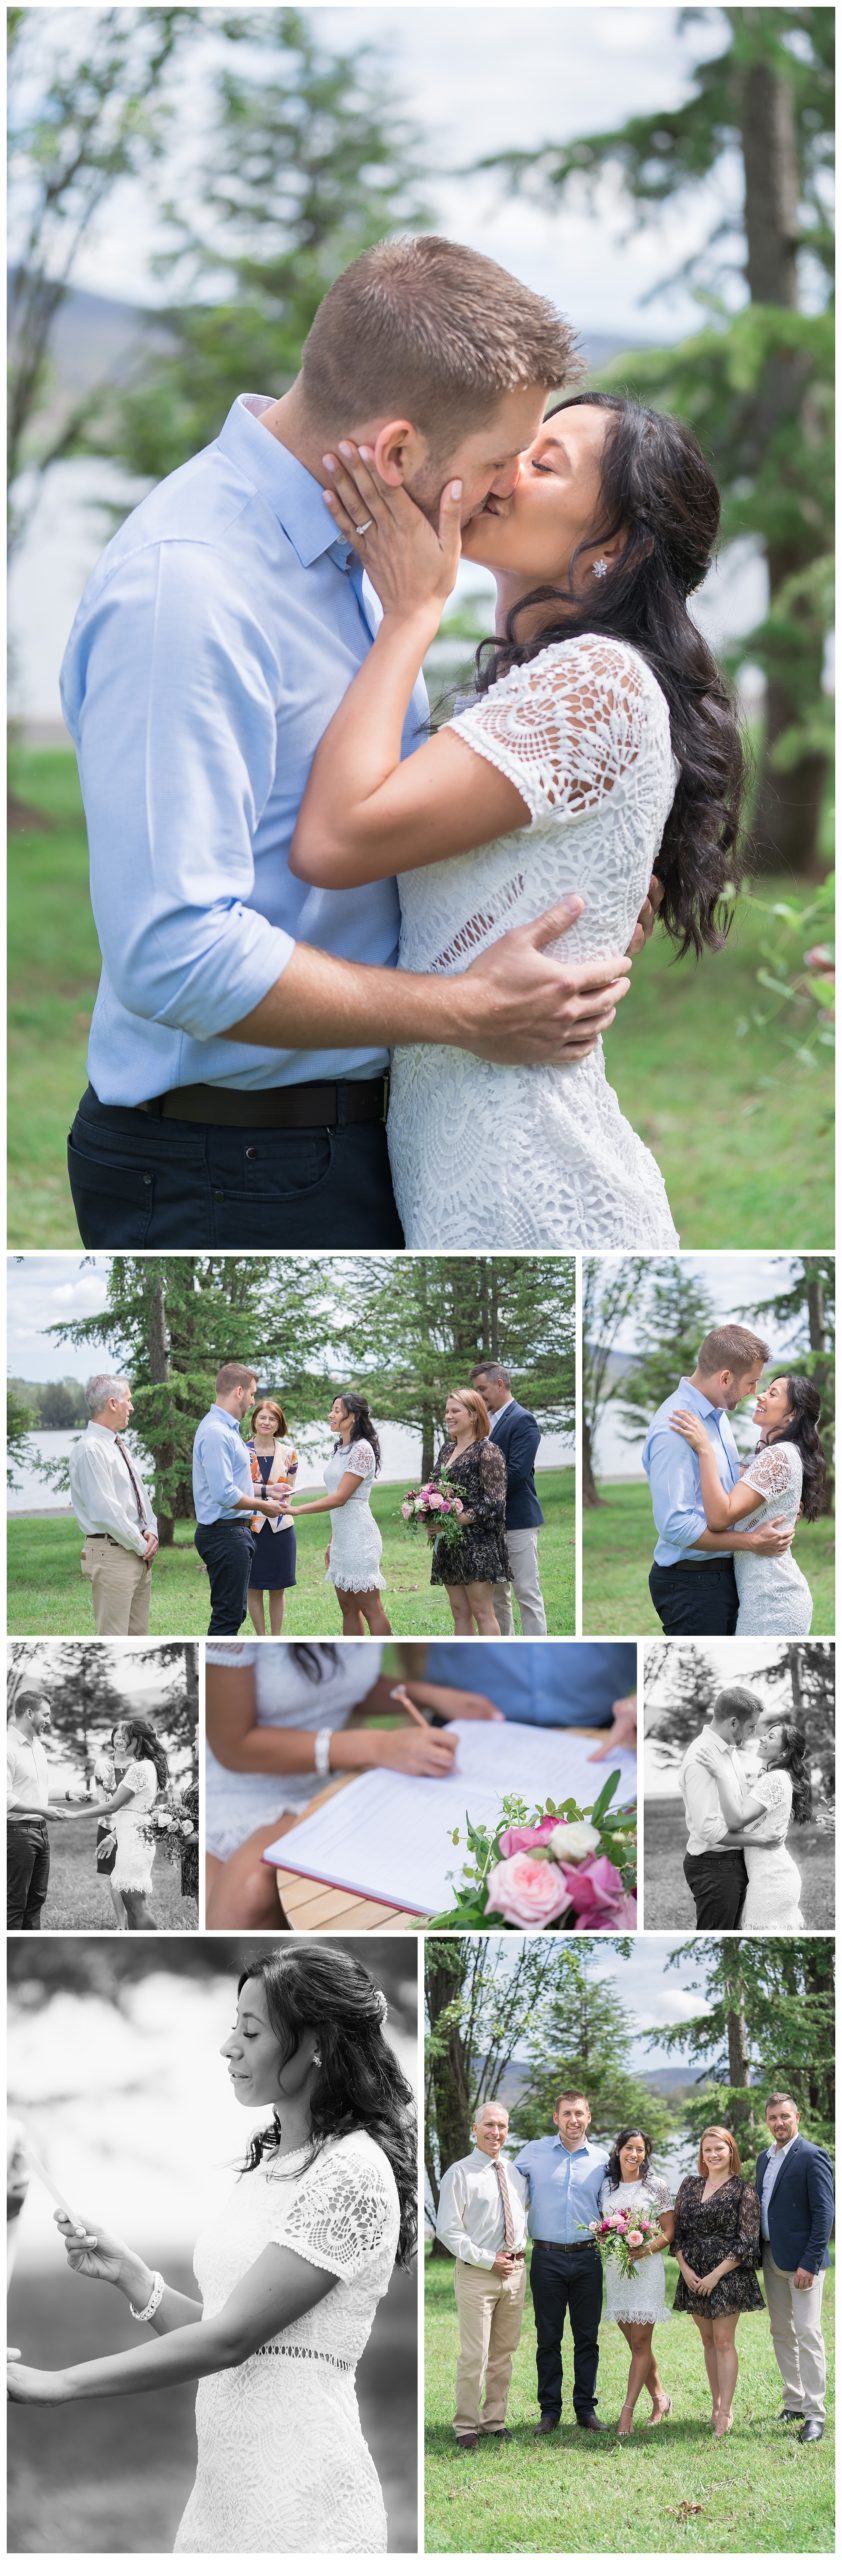 Wedding elopement locations in Canberra